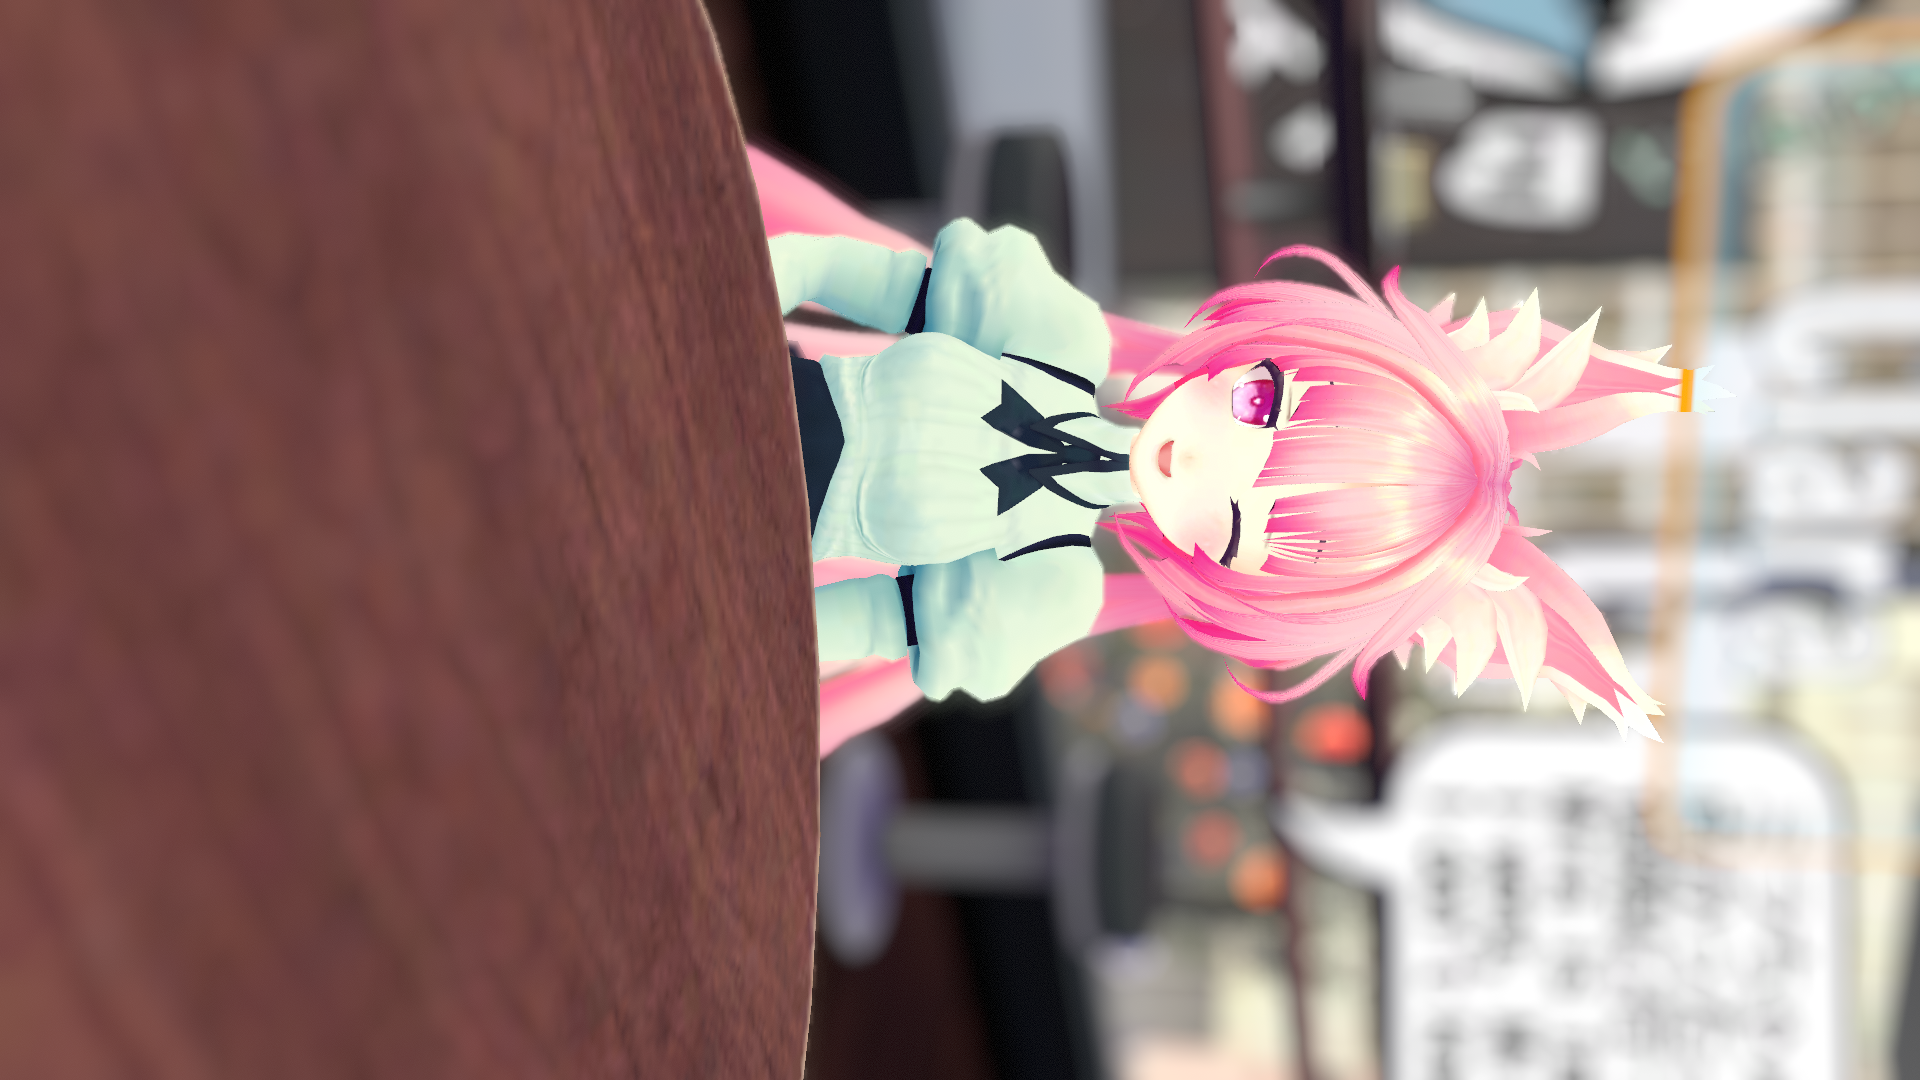 VRChat_1920x1080_2021-12-05_06-04-02.607.png